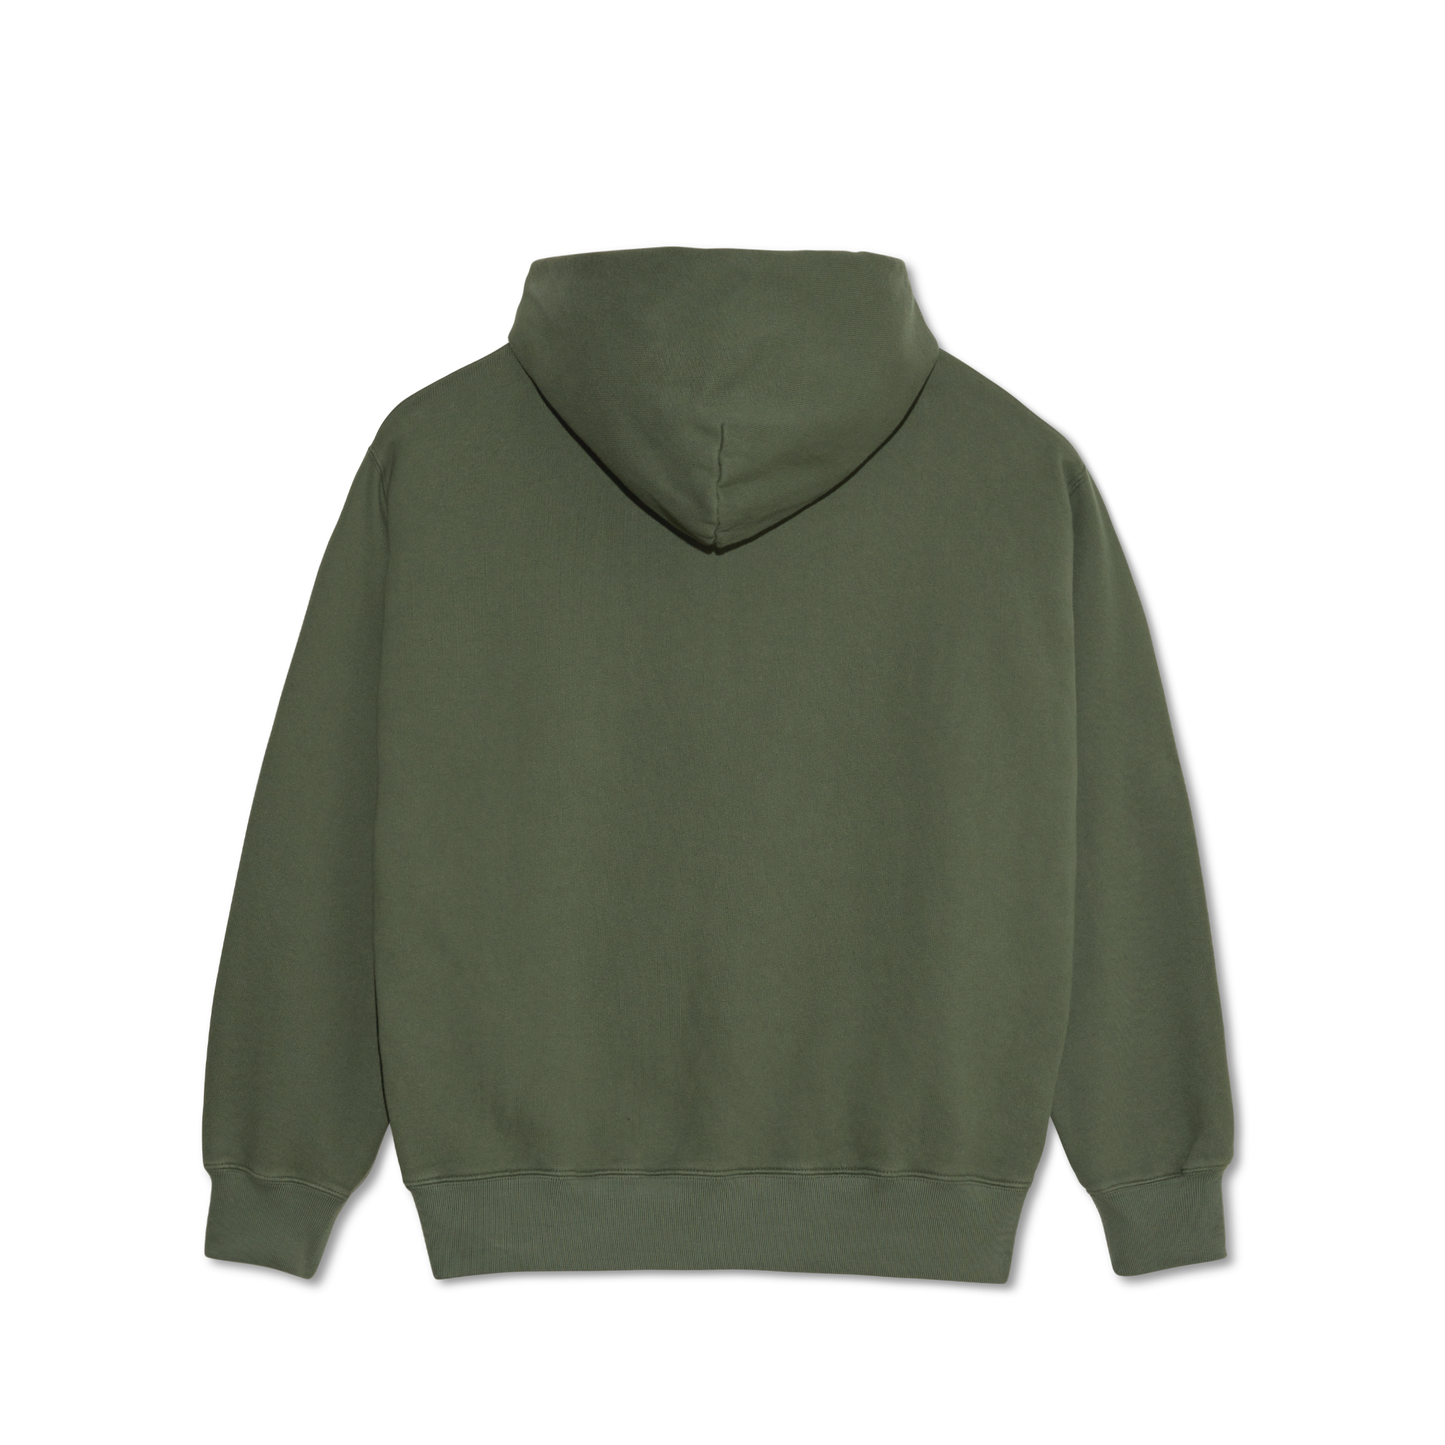 Polar Ed [We Blew It At Some Point] Hoodie Grey Green